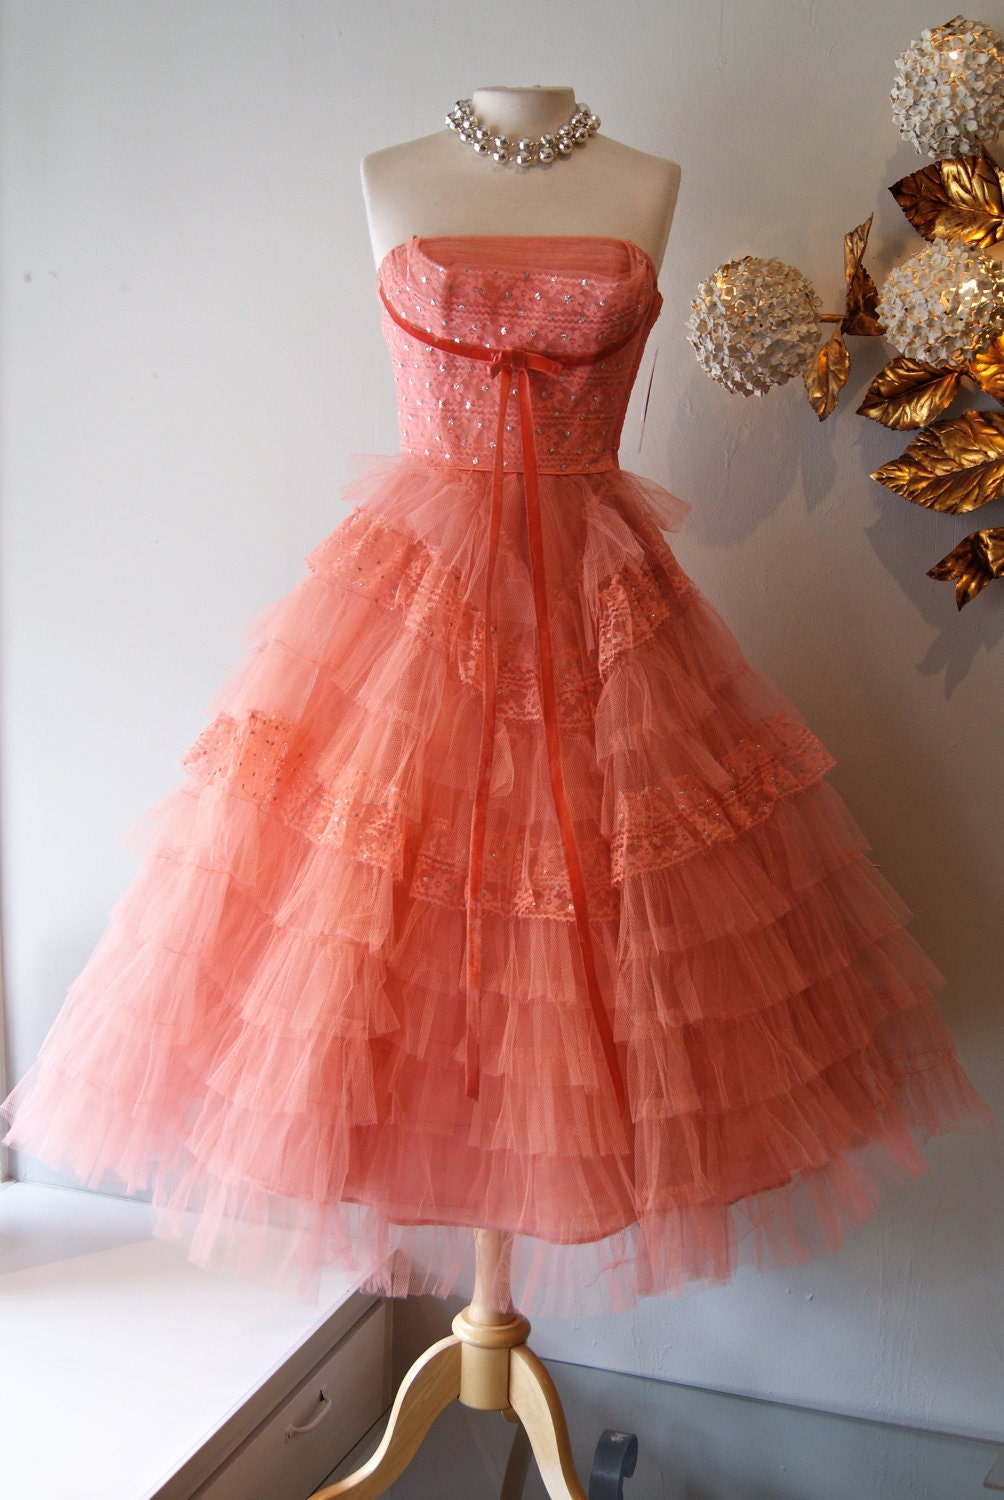 Vintage 50s Coral Cupcake Party Prom Dress Strapless Silver Polka Dots shelf Bust Full Fluffy Skirt Dream